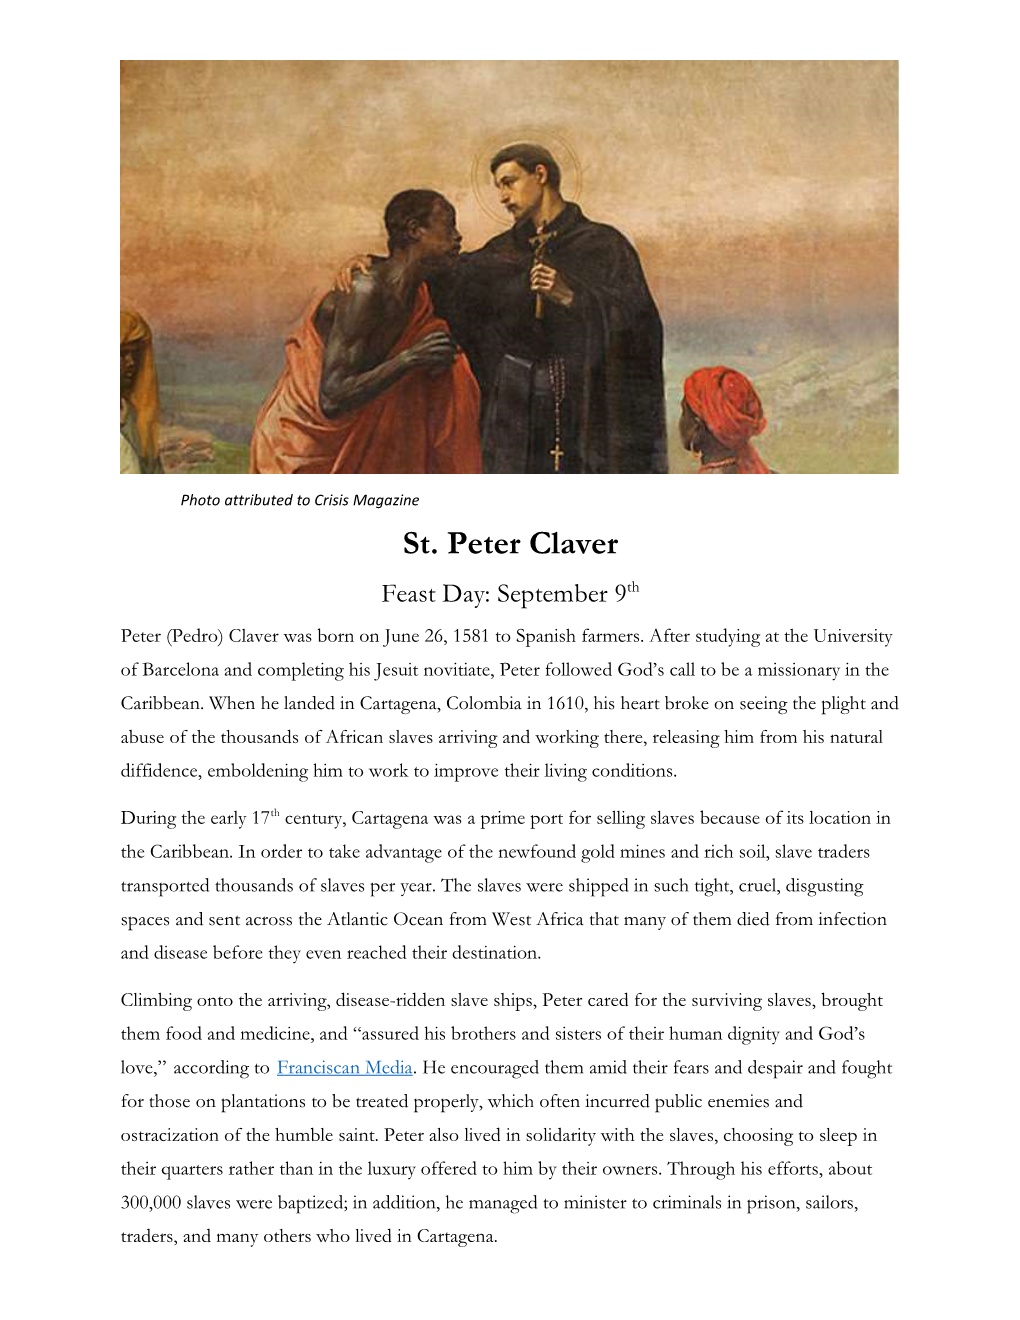 St. Peter Claver Feast Day: September 9Th Peter (Pedro) Claver Was Born on June 26, 1581 to Spanish Farmers